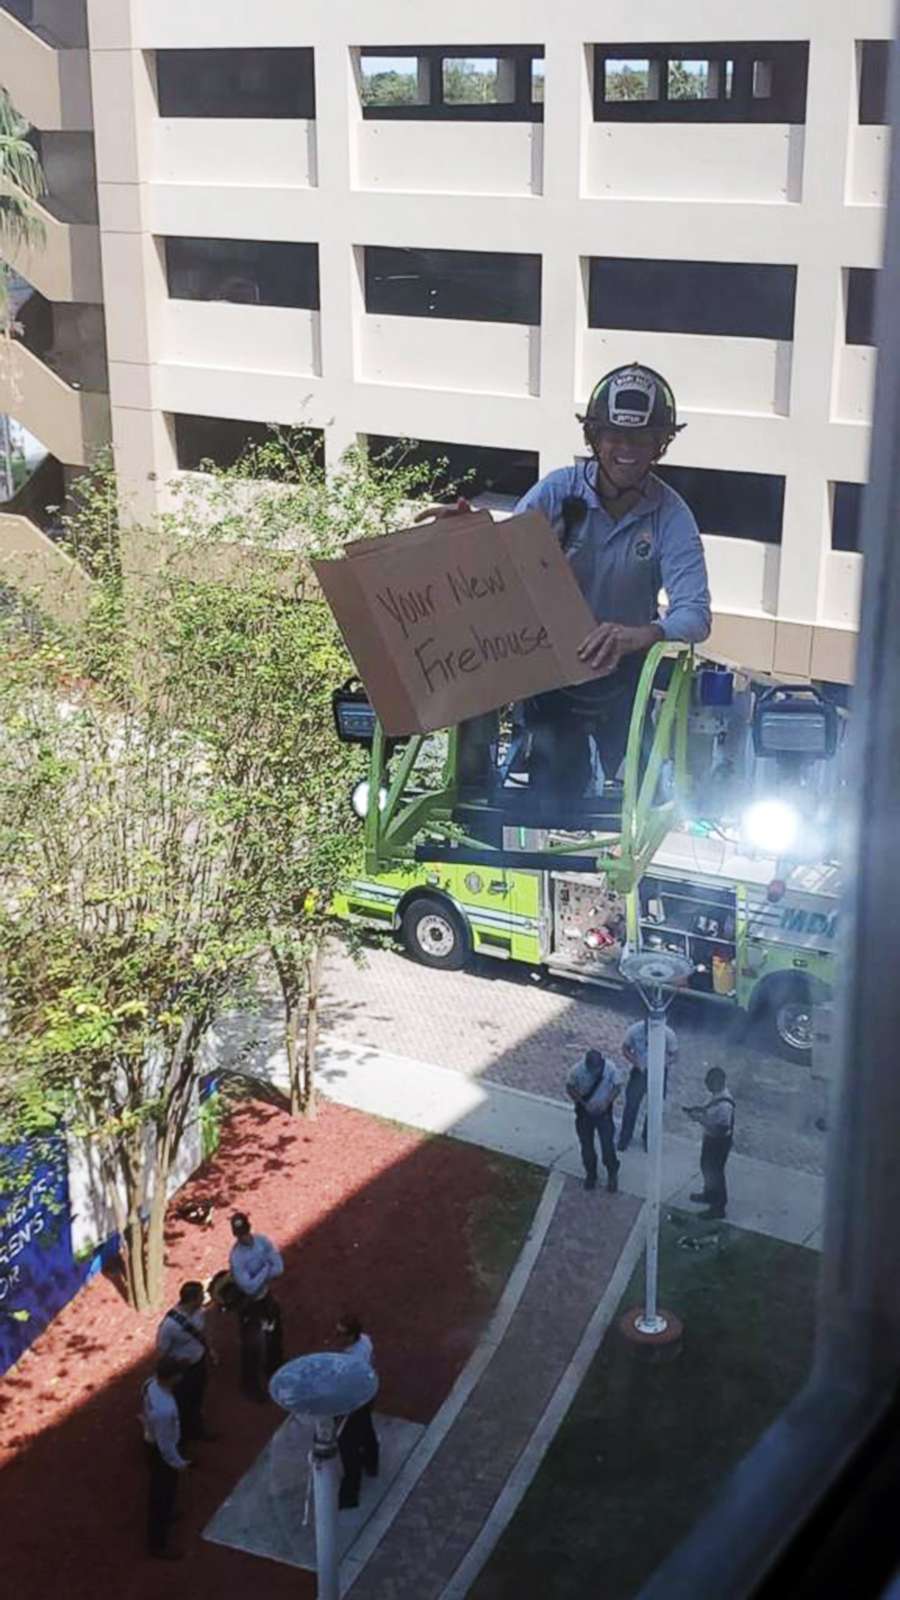 PHOTO: A firefighter holds a sign that says, "Your new firehouse," while visiting a fellow lieutenant hospitalized in Miami-Dade County, Fla., April 3, 2020.